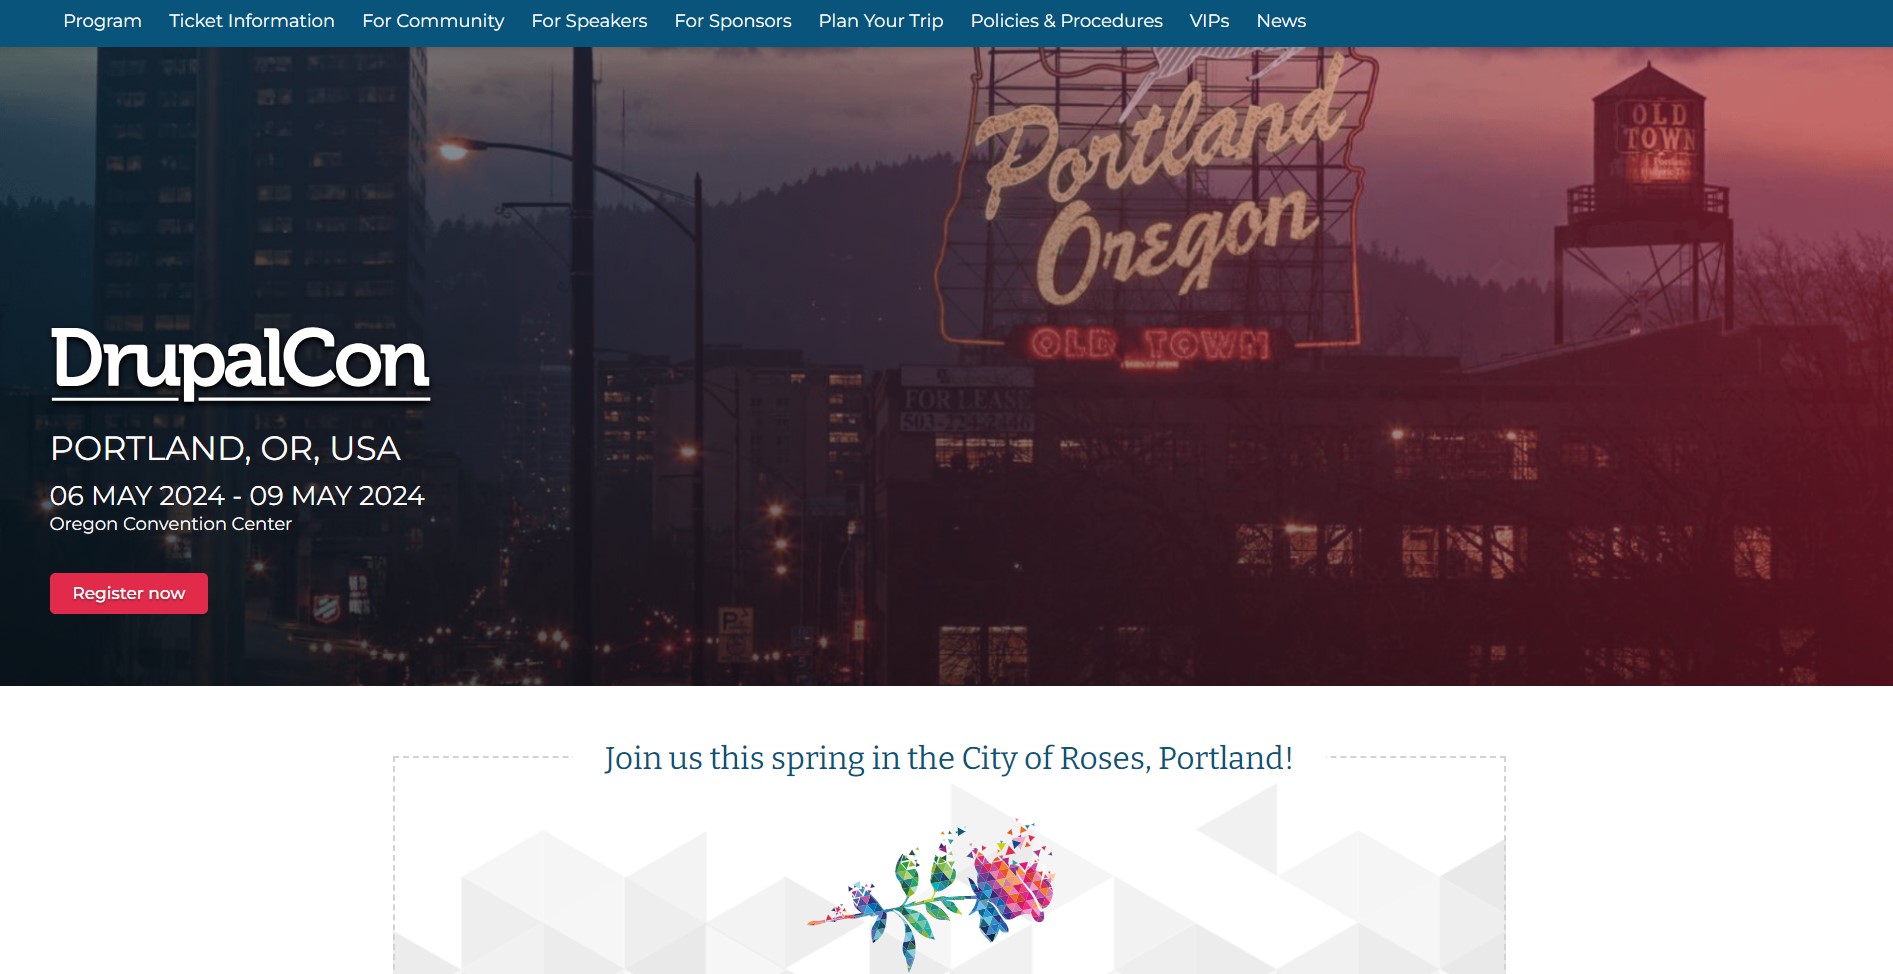 DrupalCon Portland 2024’s official page.